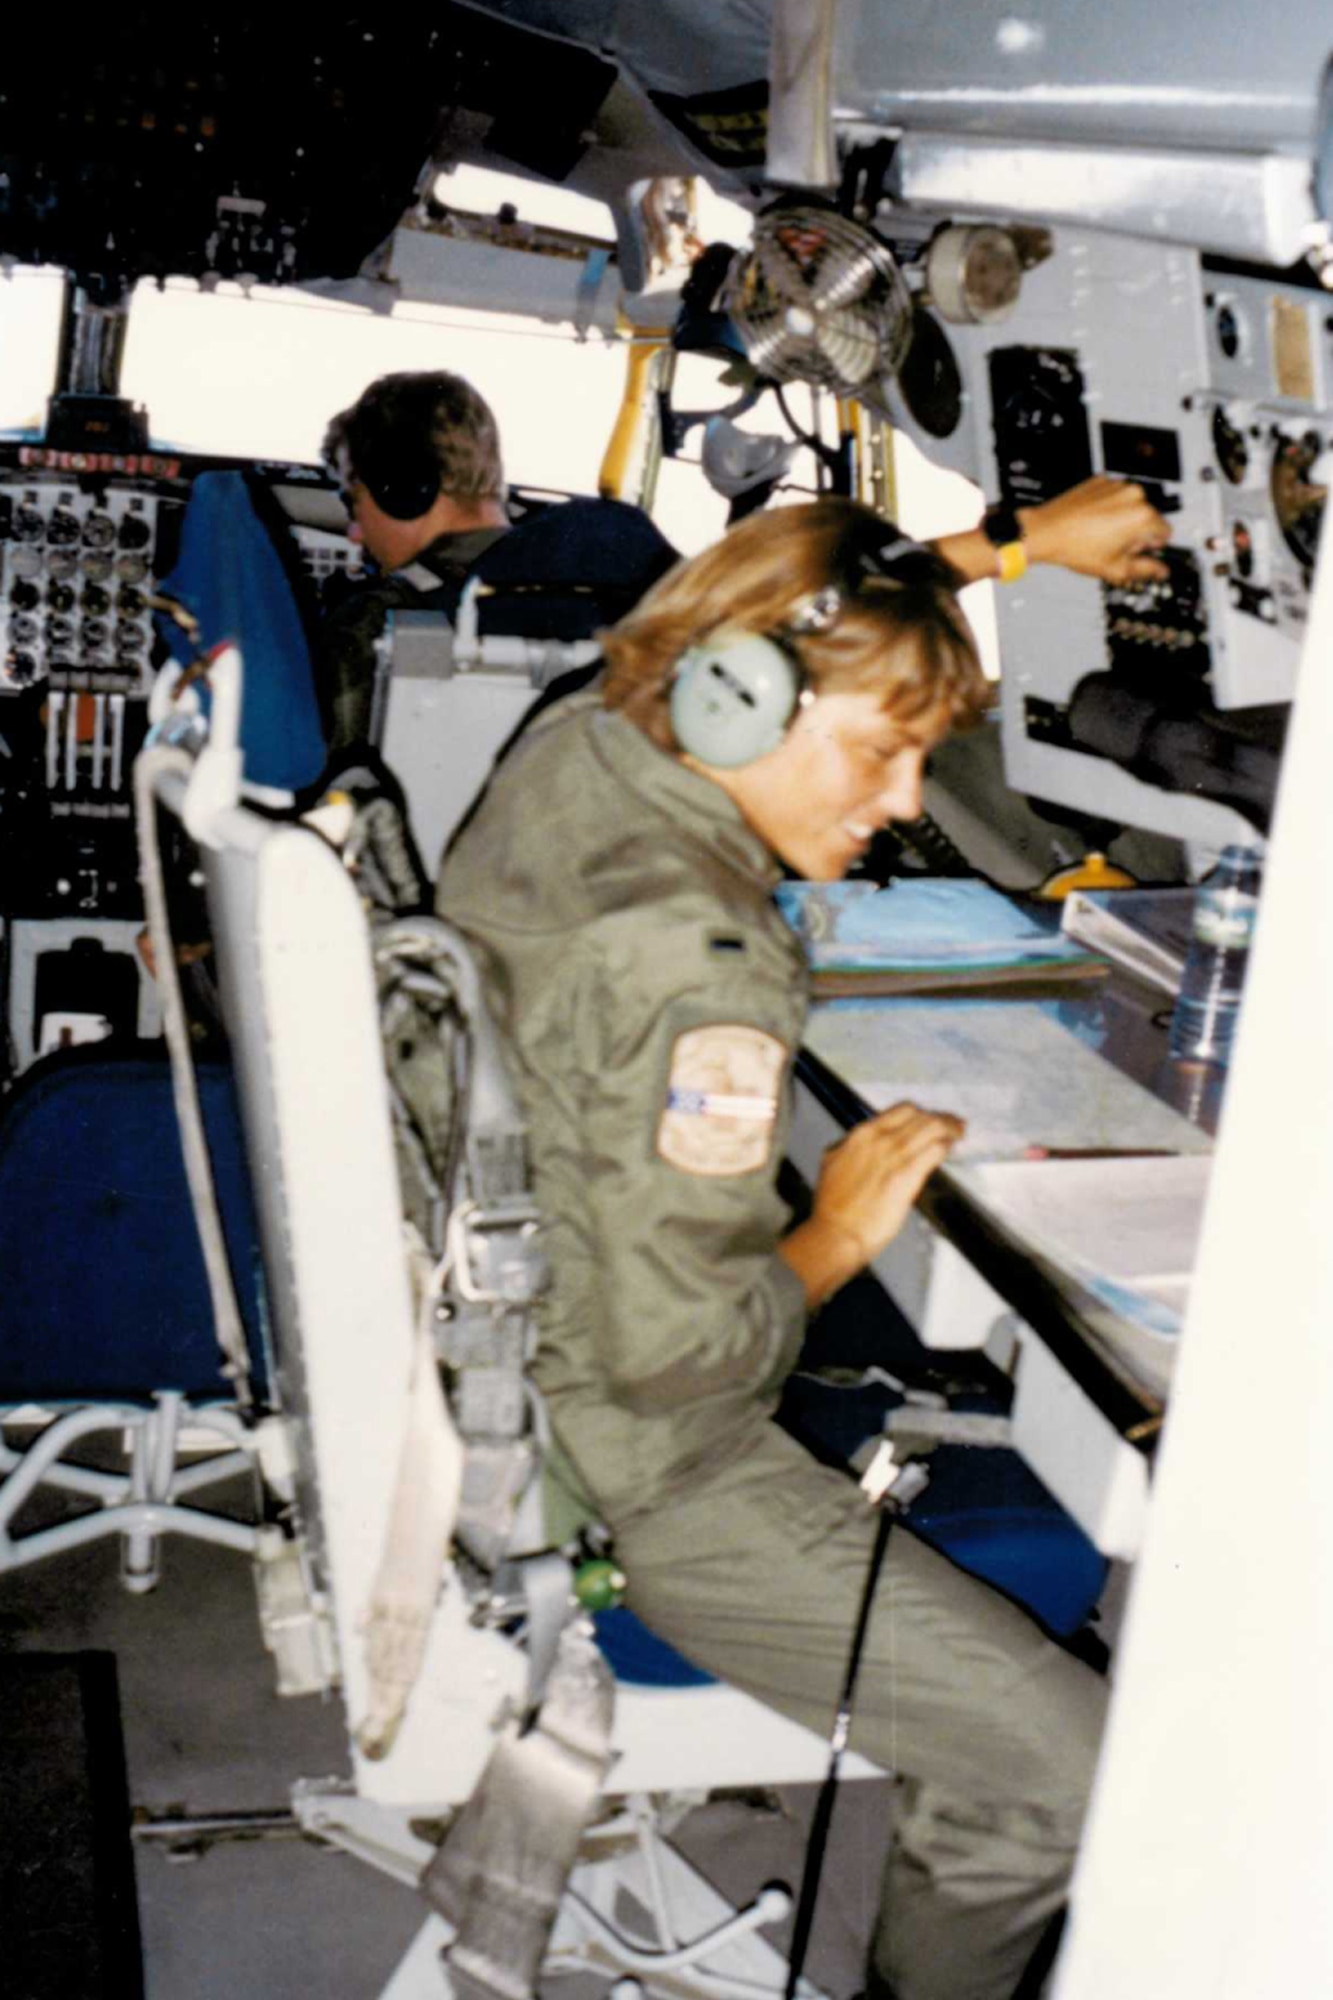 First Lt. Dawn Everett, then a KC-135 Stratotanker navigator operates during her activation and deployment for Desert Storm 25 years ago. Airmen from Grissom deployed to Saudi Arabia and other locations in support of the operation. (U.S. Air Force photo/courtesy Dawn Everett)